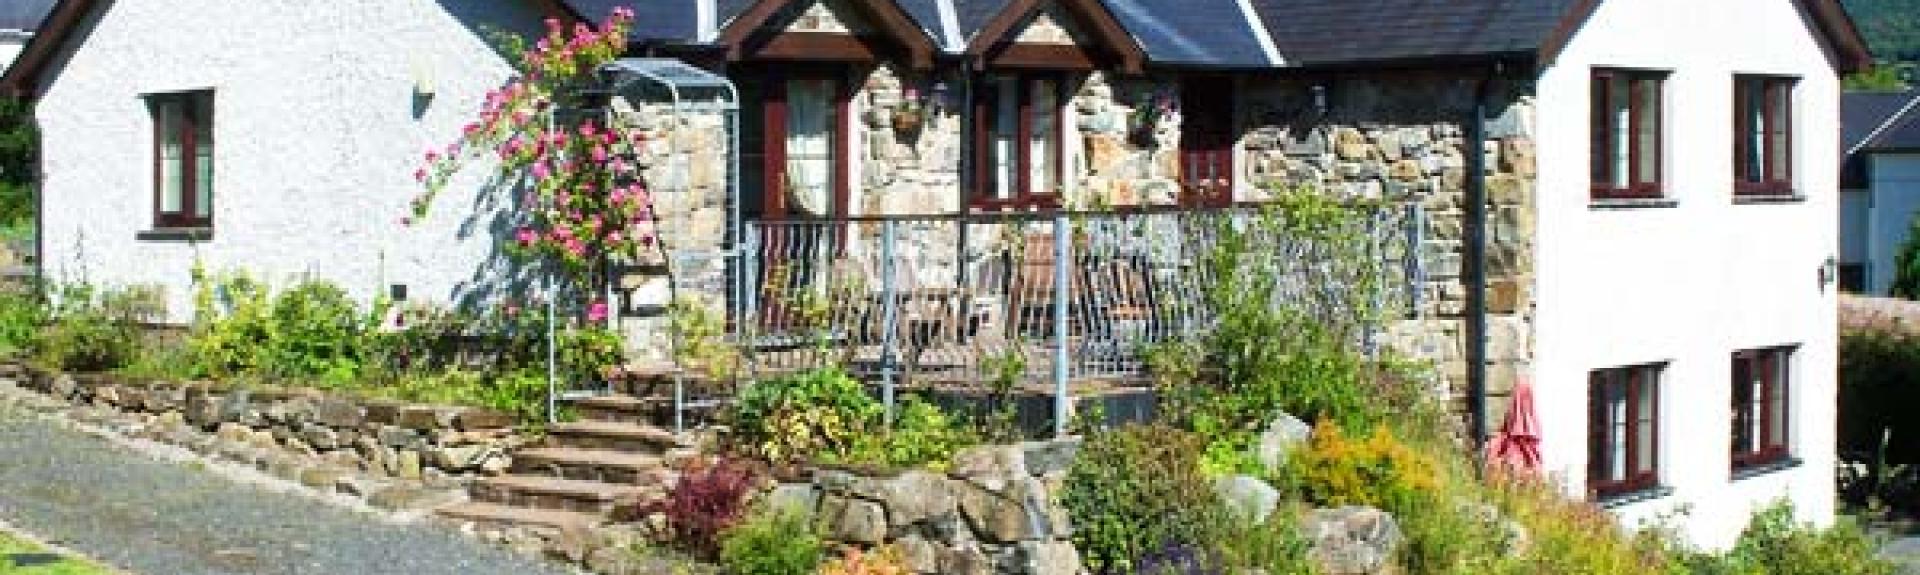 A large L-shaped Gwynedd holiday cottage house with a deck and rockery garden. garden.